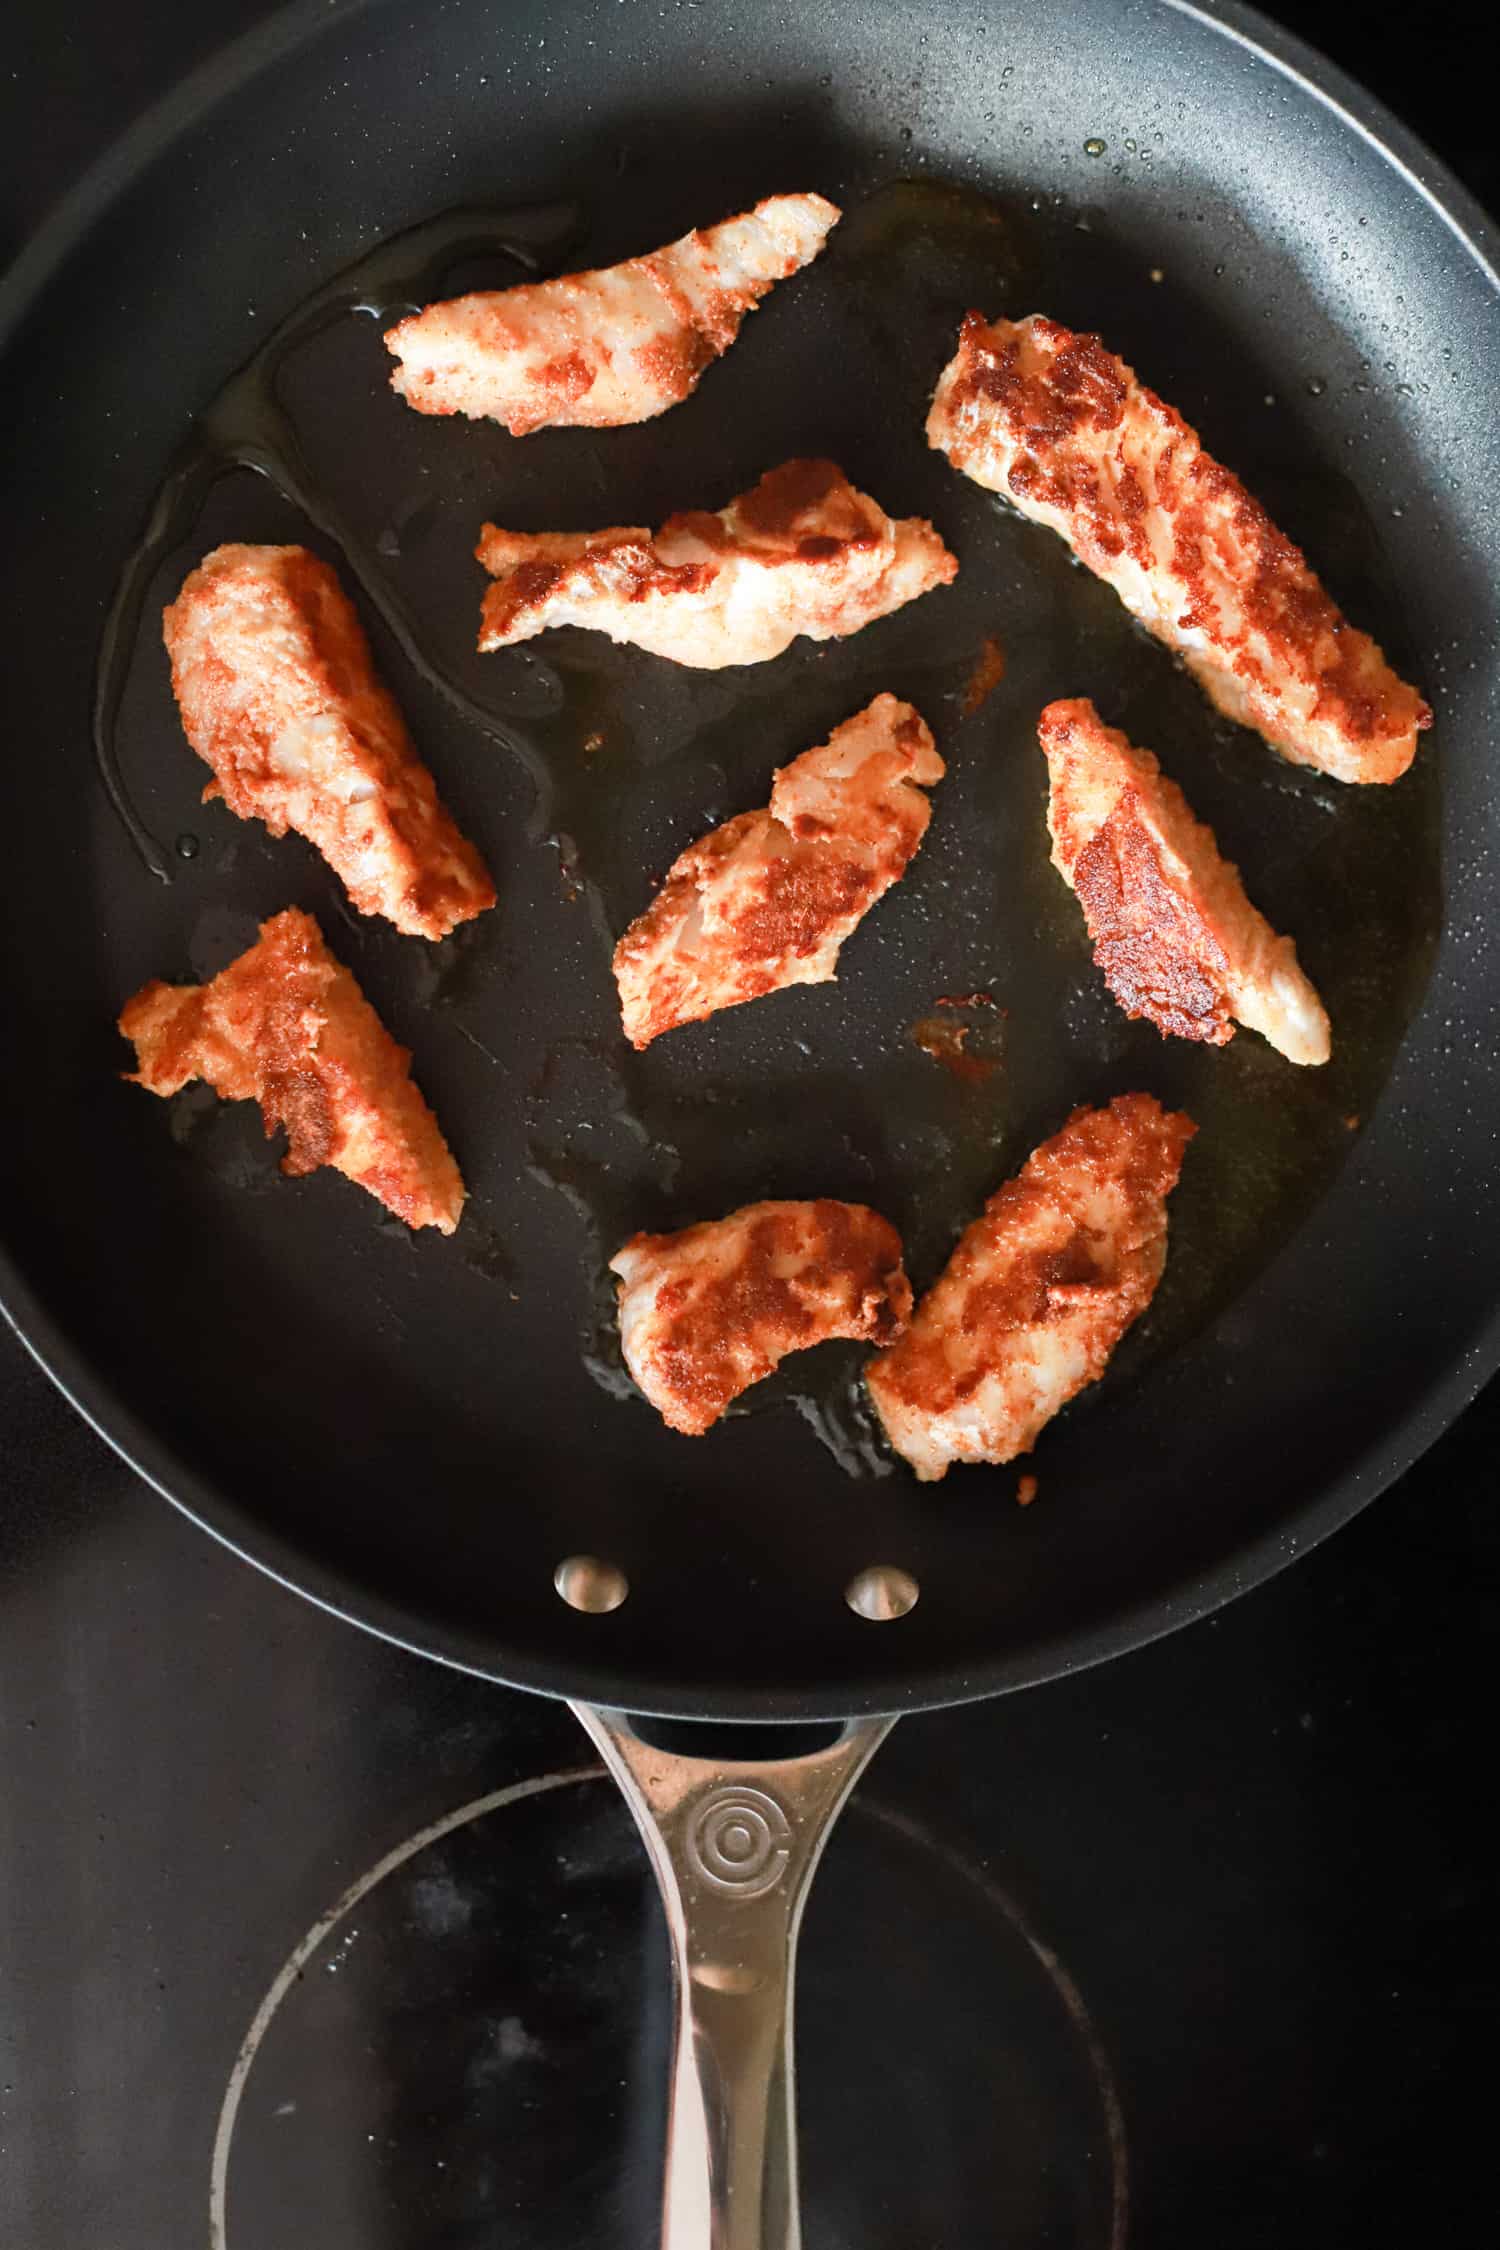 blackened fish pieces cooked in a nonstick skillet.